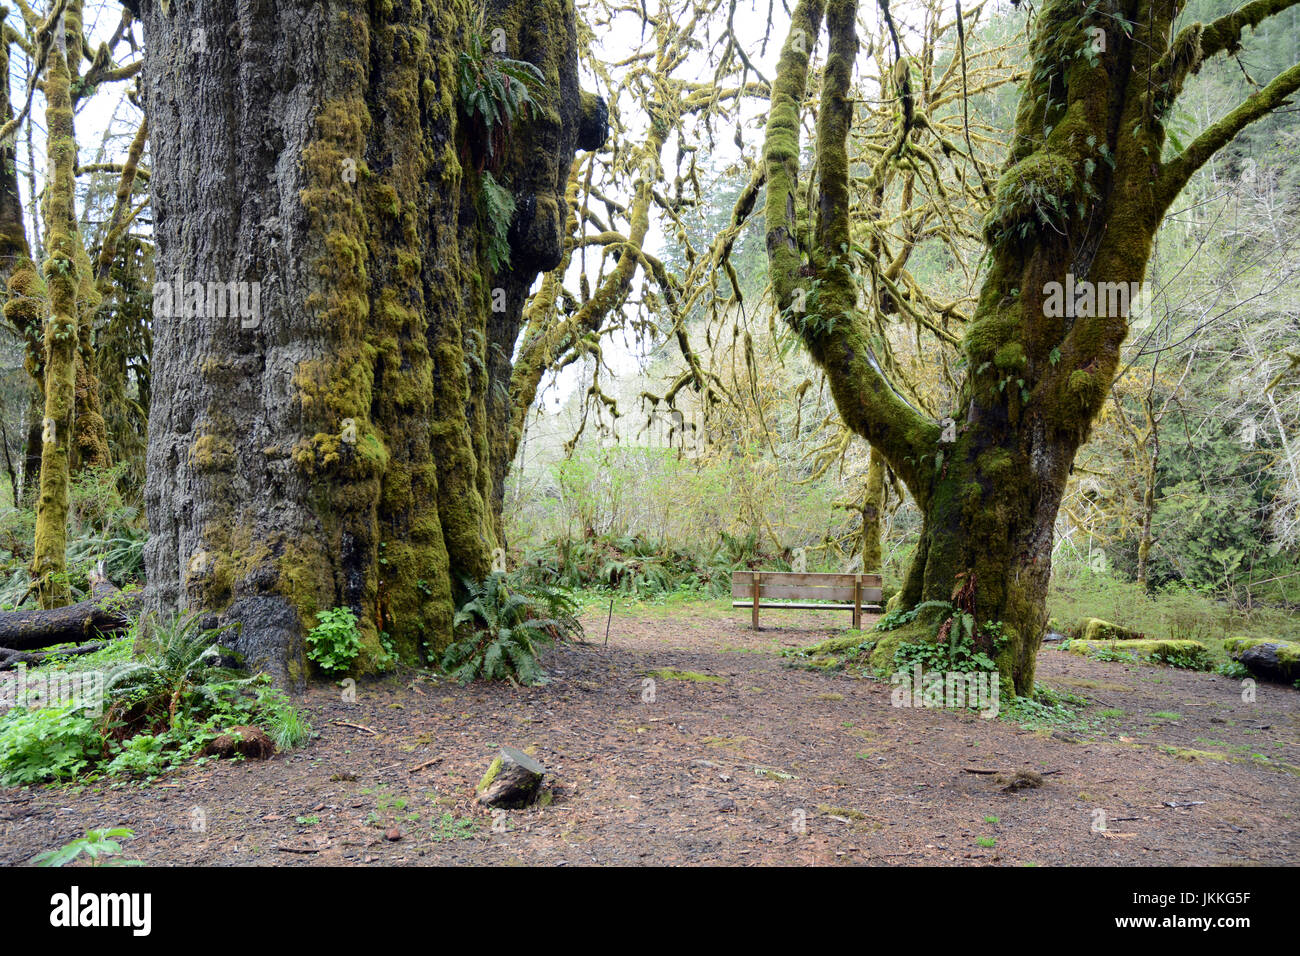 The San Juan Spruce (left), a giant, old growth Sitka spruce tree in the rainforest near Port Renfrew, British Columbia, Canada. Stock Photo